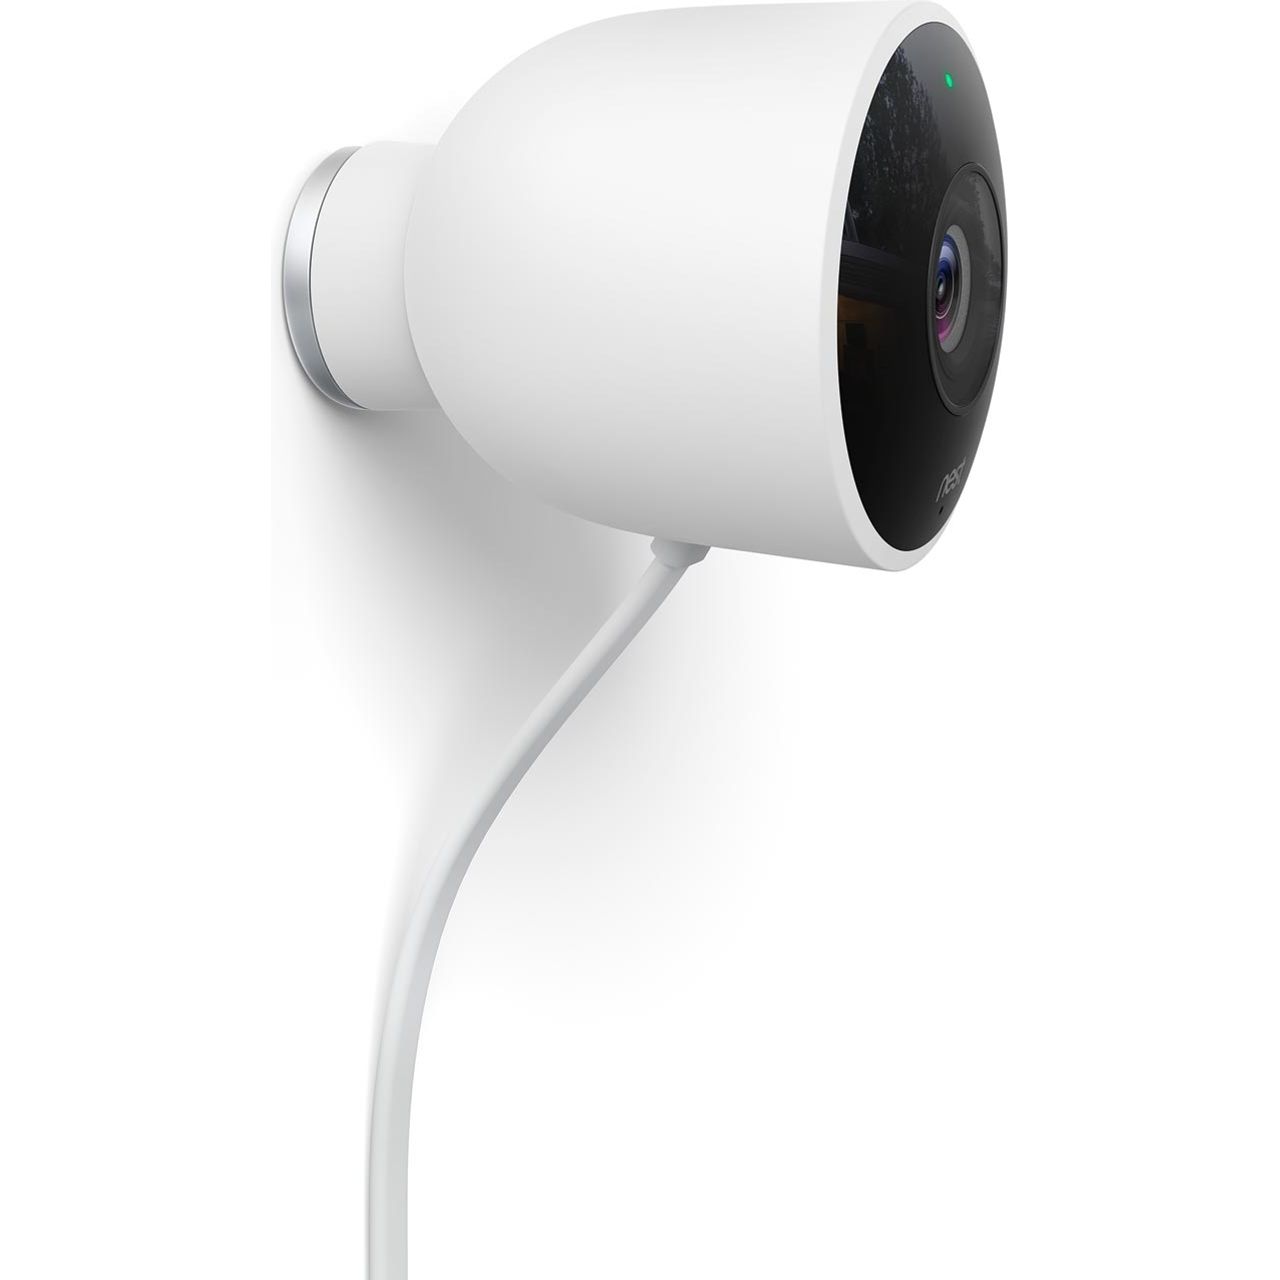 Nest Cam Outdoor Security Camera Full HD 1080p Review